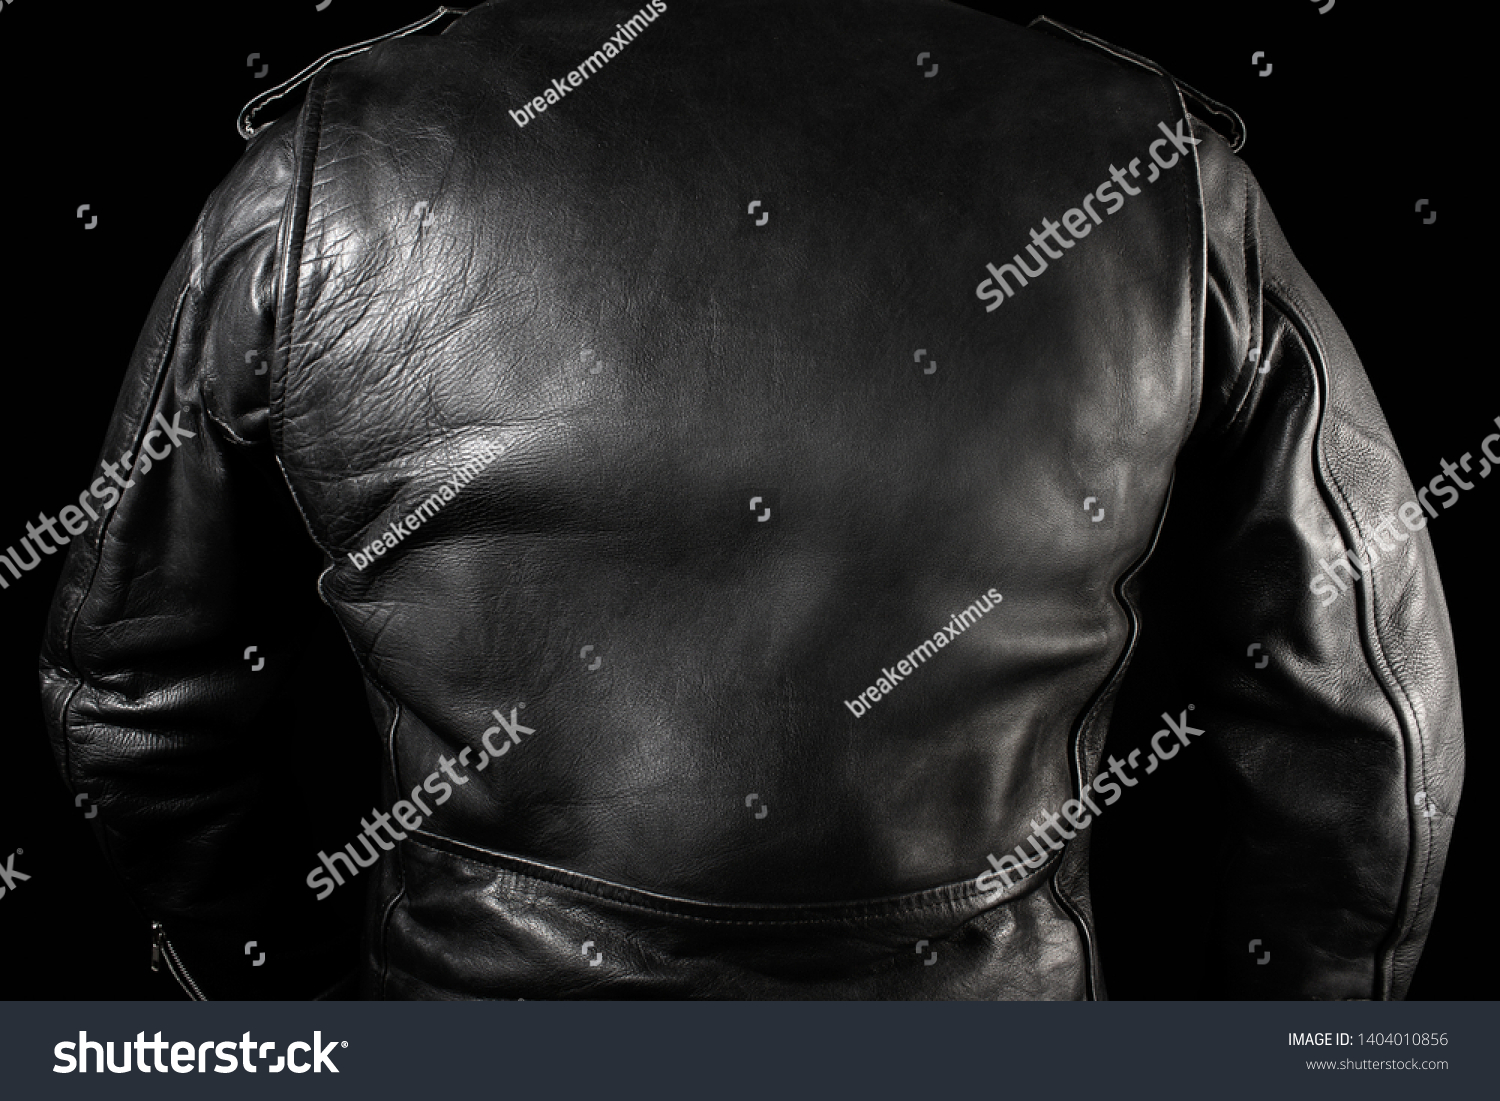 Photo of a man in black leather biker jacket standing on neon lightened night street background rear view. #1404010856